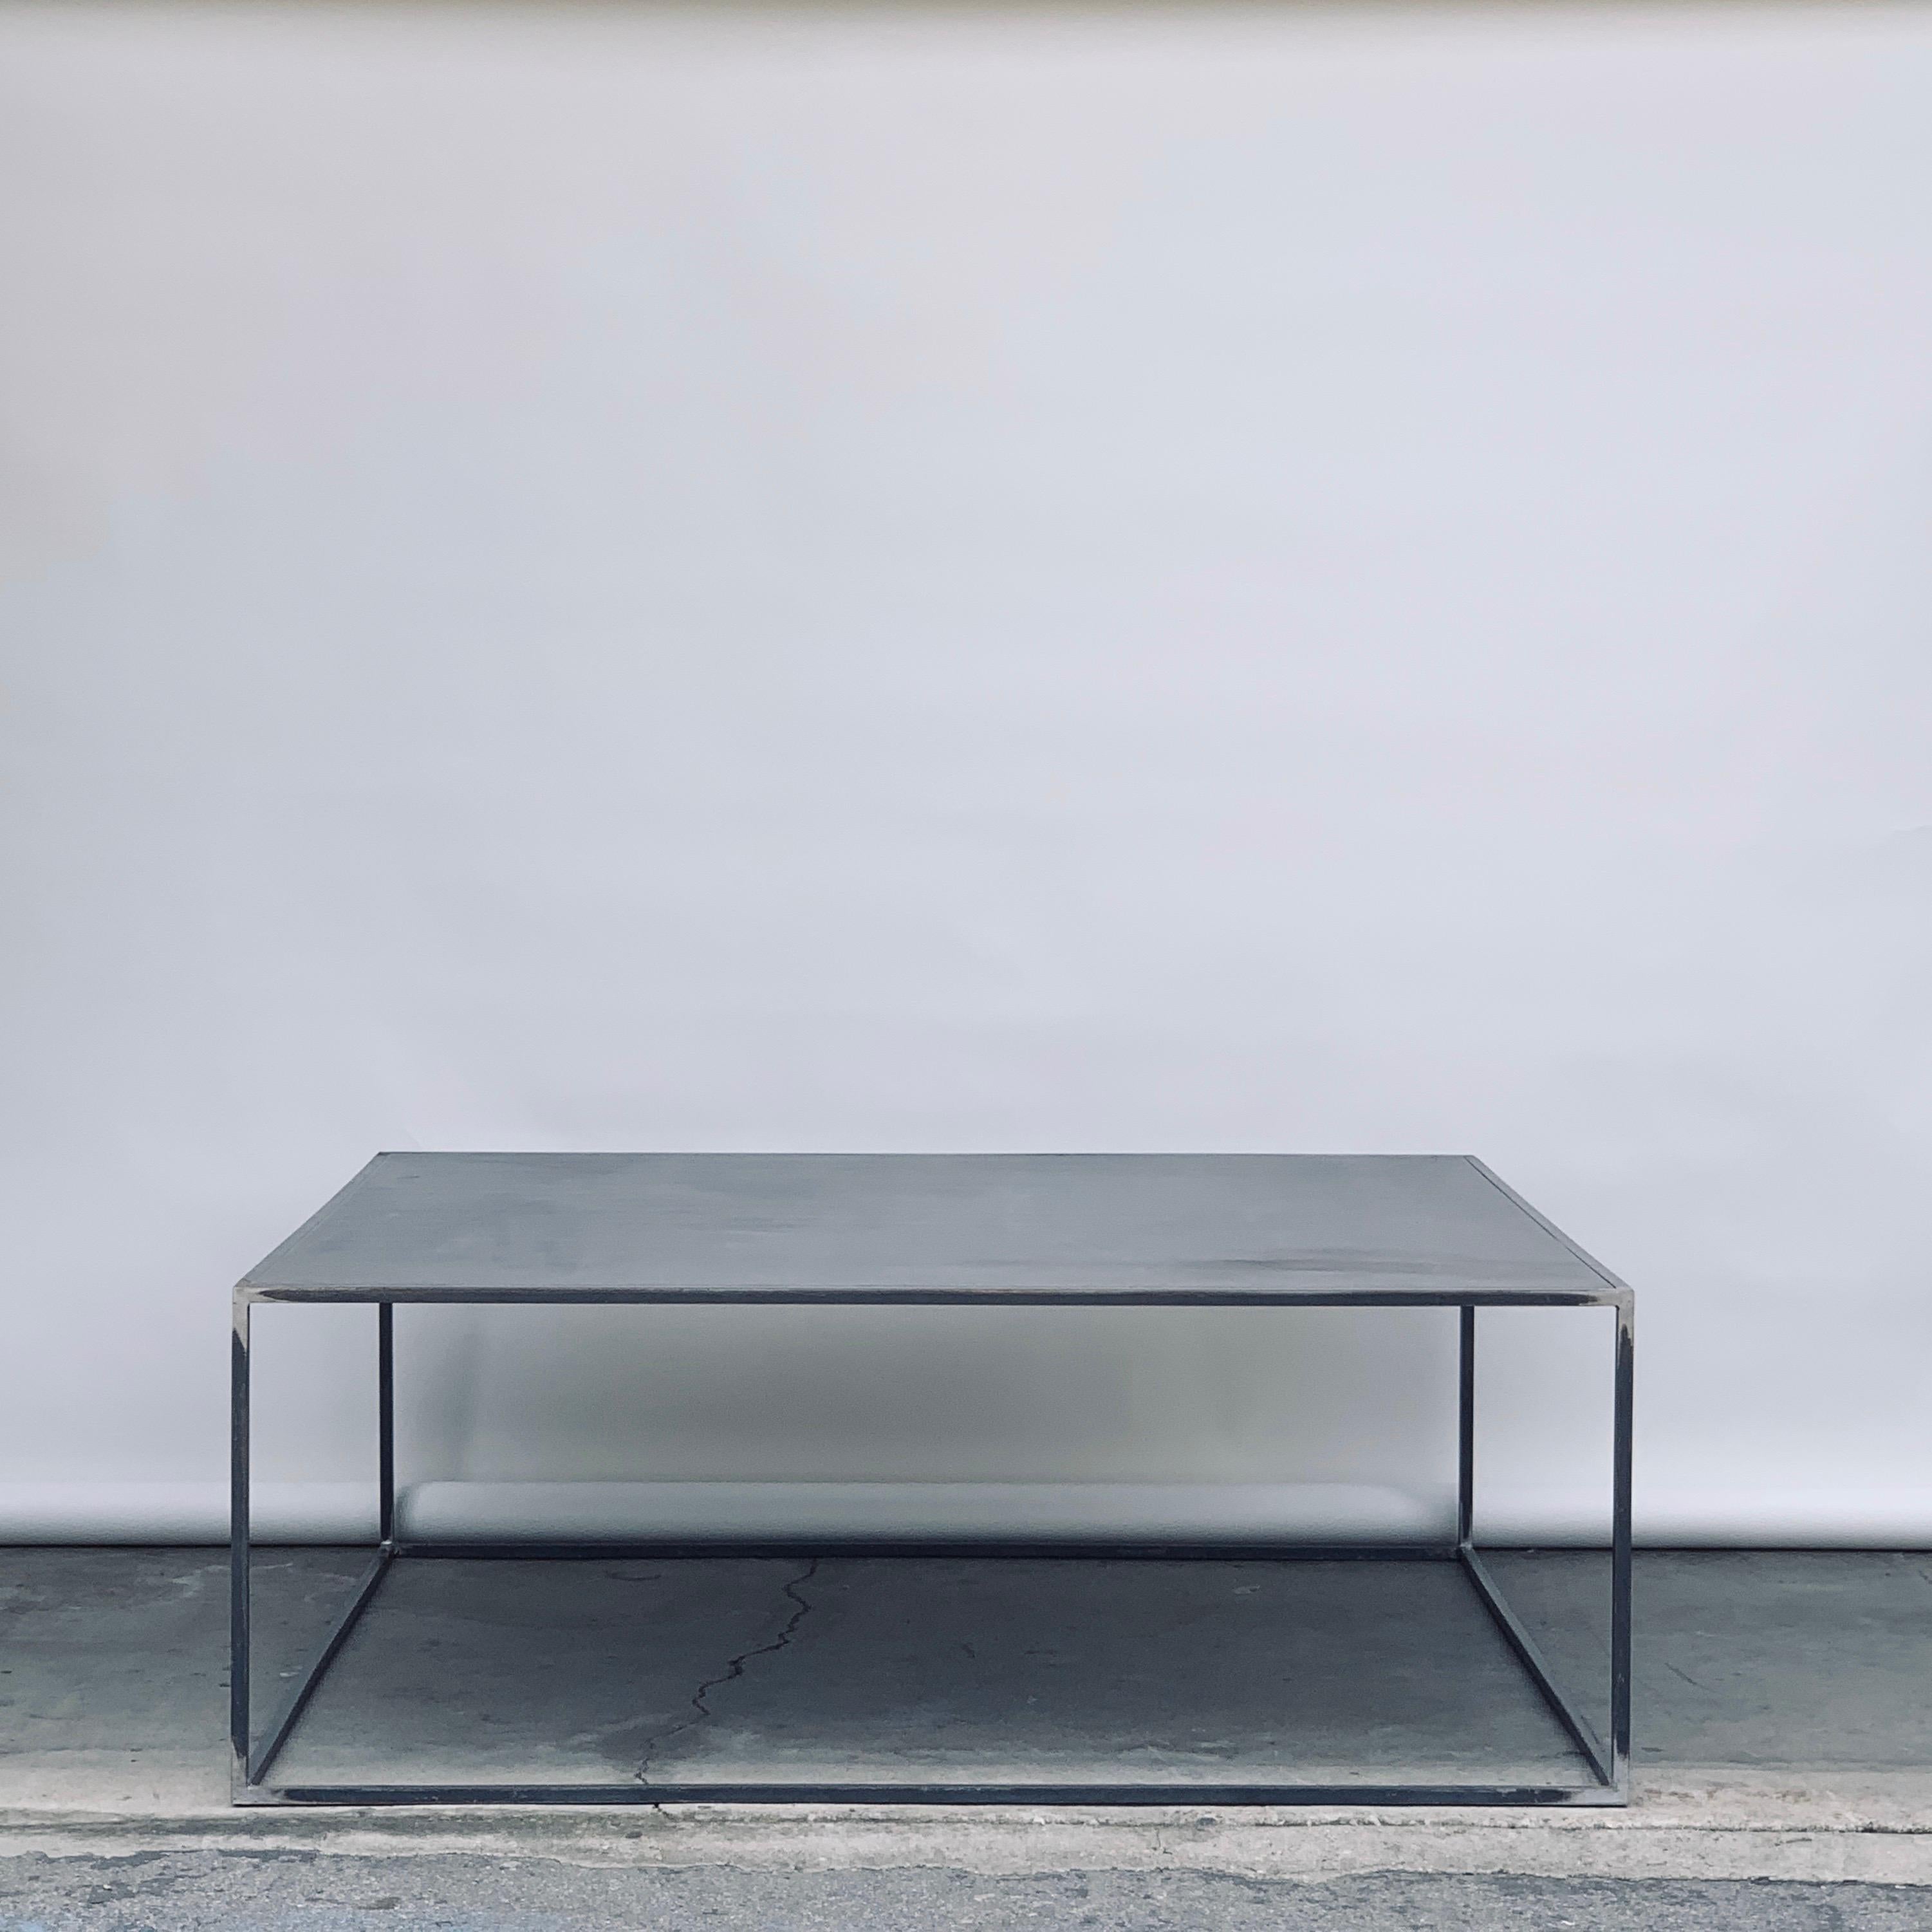 Huge Minimalist 'Filiforme' patinated steel plate square coffee table by Design Frères.